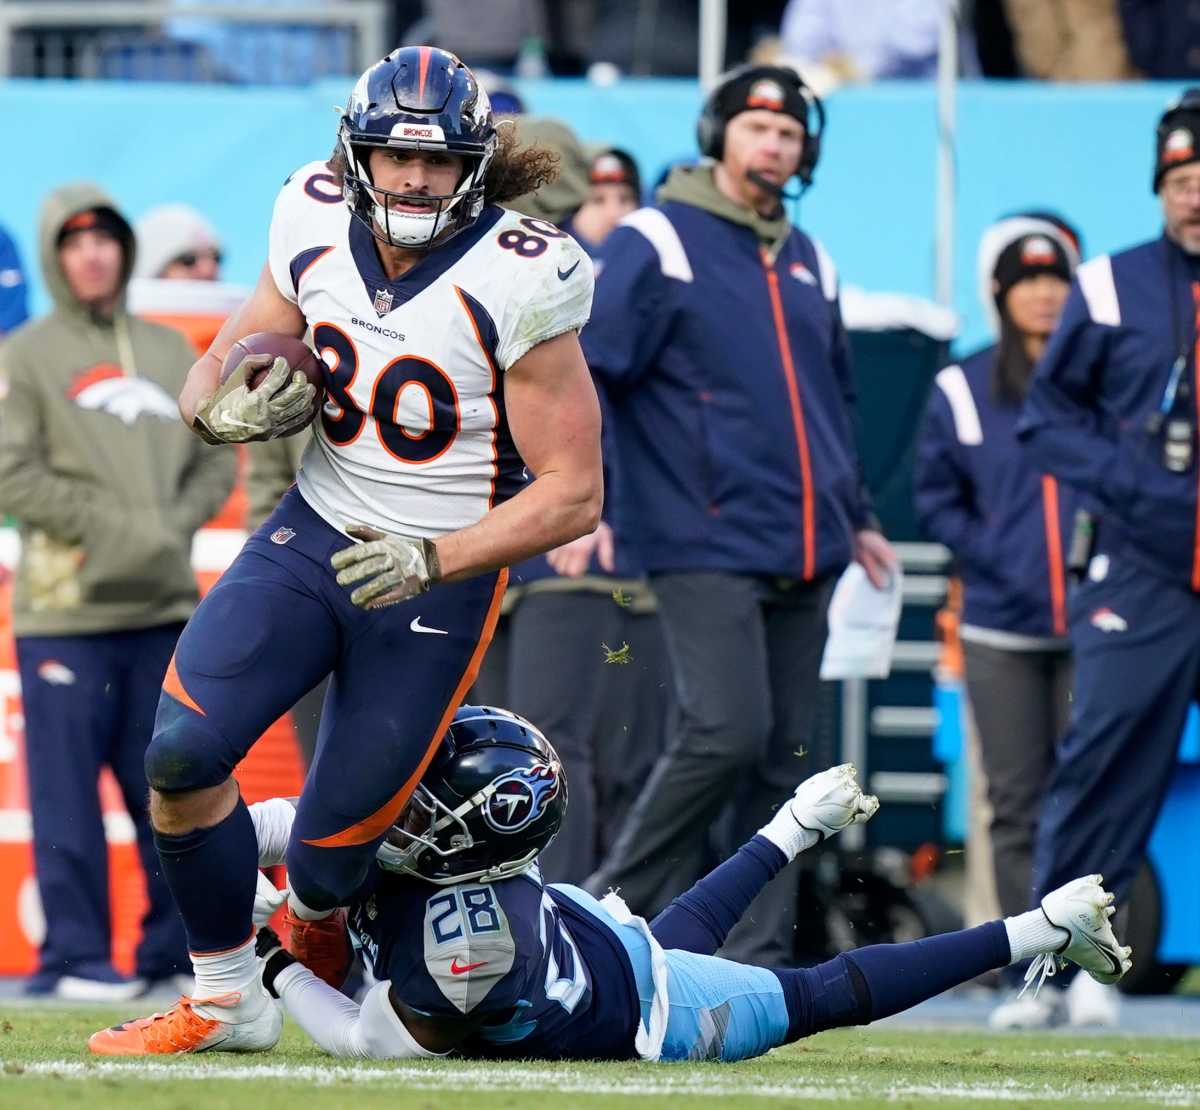 Denver Broncos tight end Greg Dulcich runs with the ball and is tackled by a Tennessee Titans defender